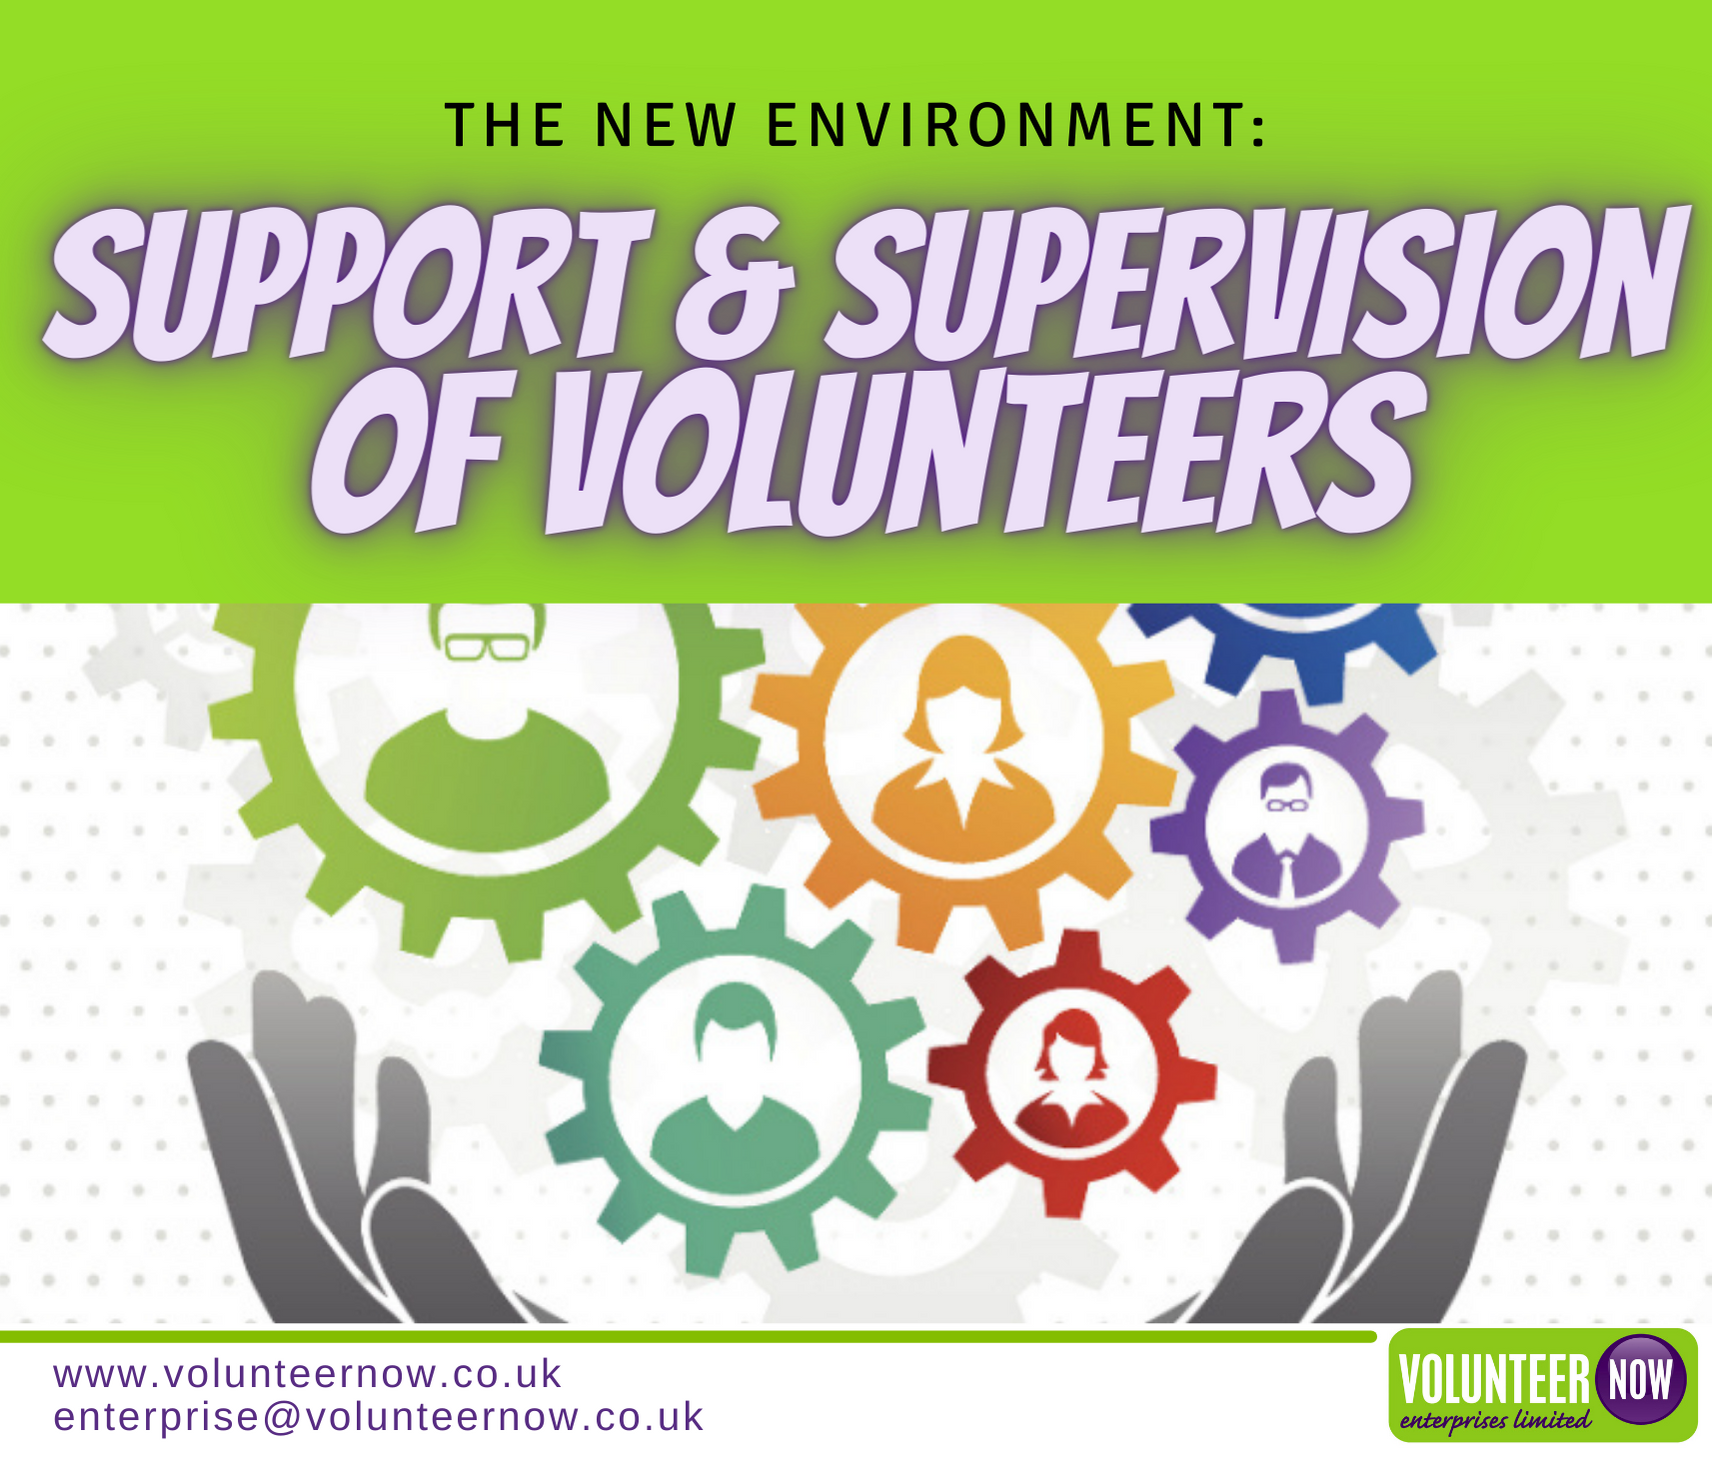 Support & Supervision of Volunteers